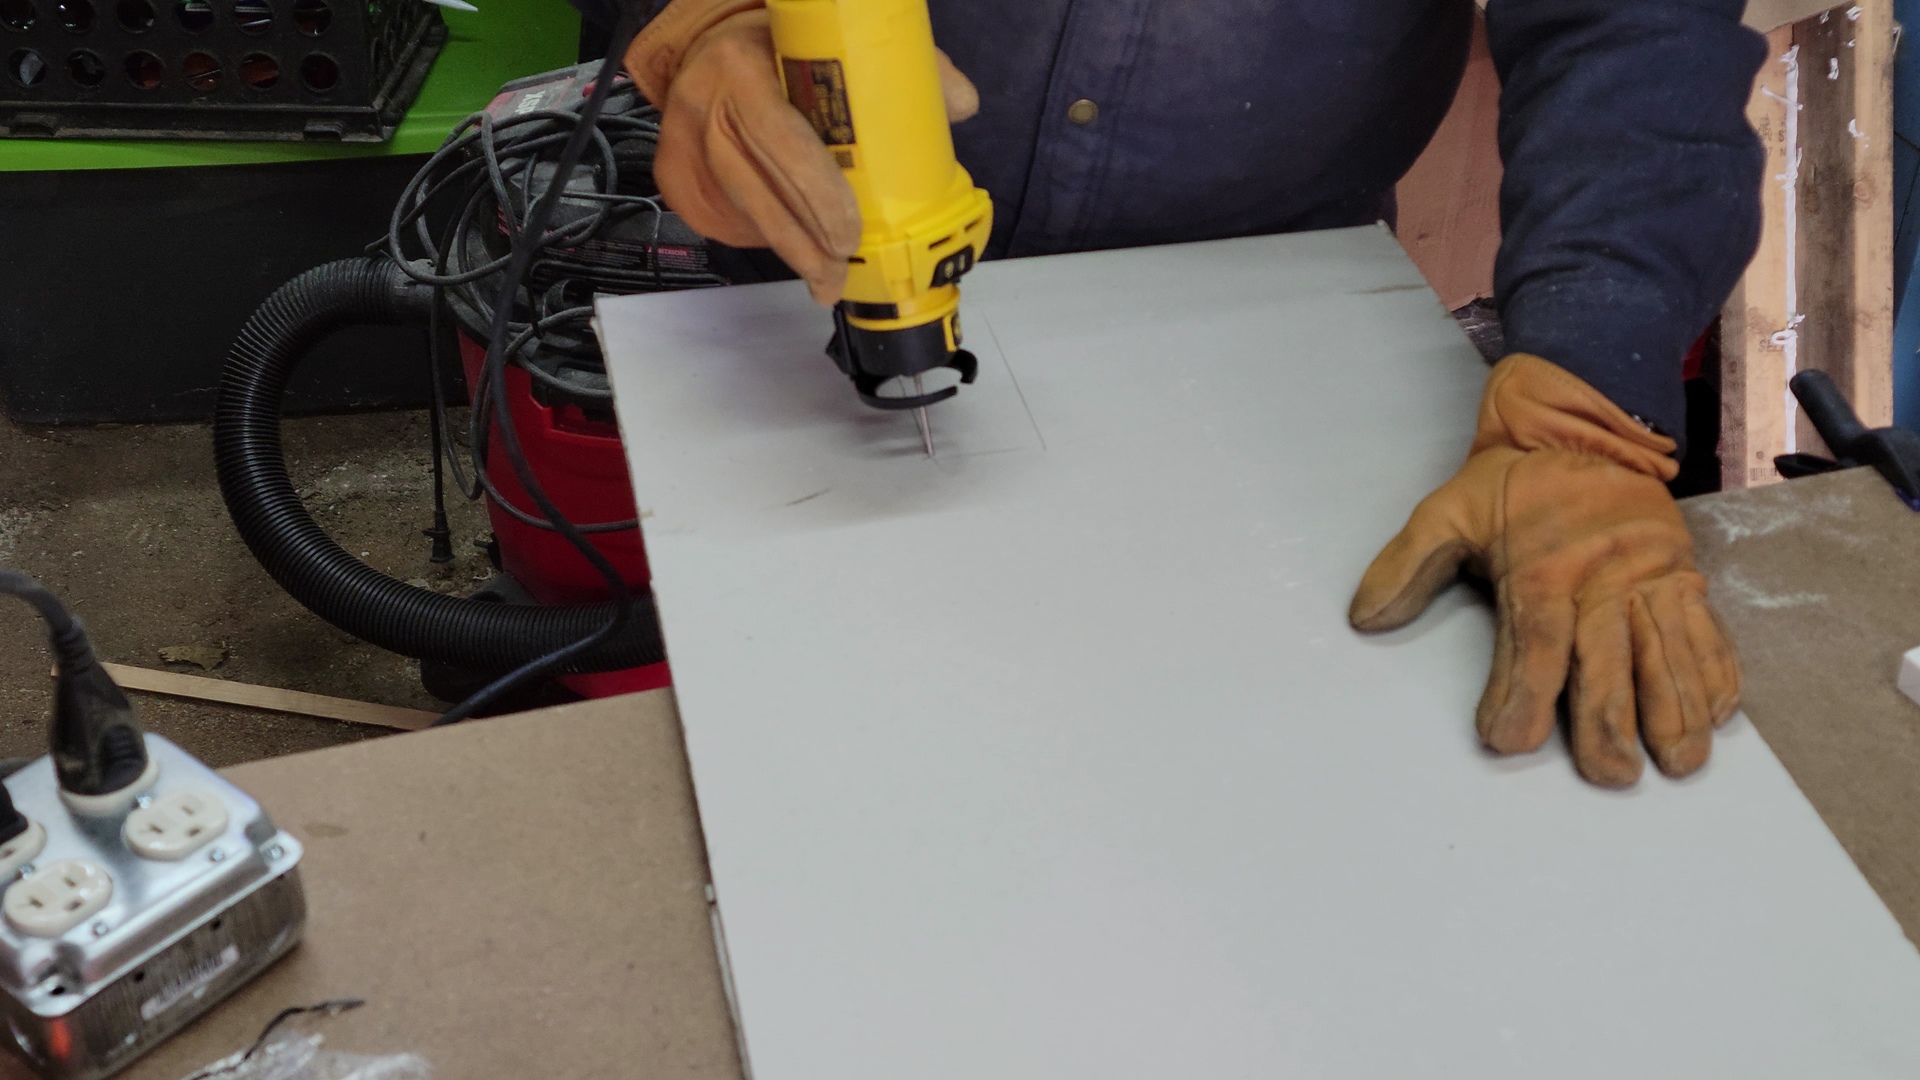 A person using the best rotary tool option to cut drywall.